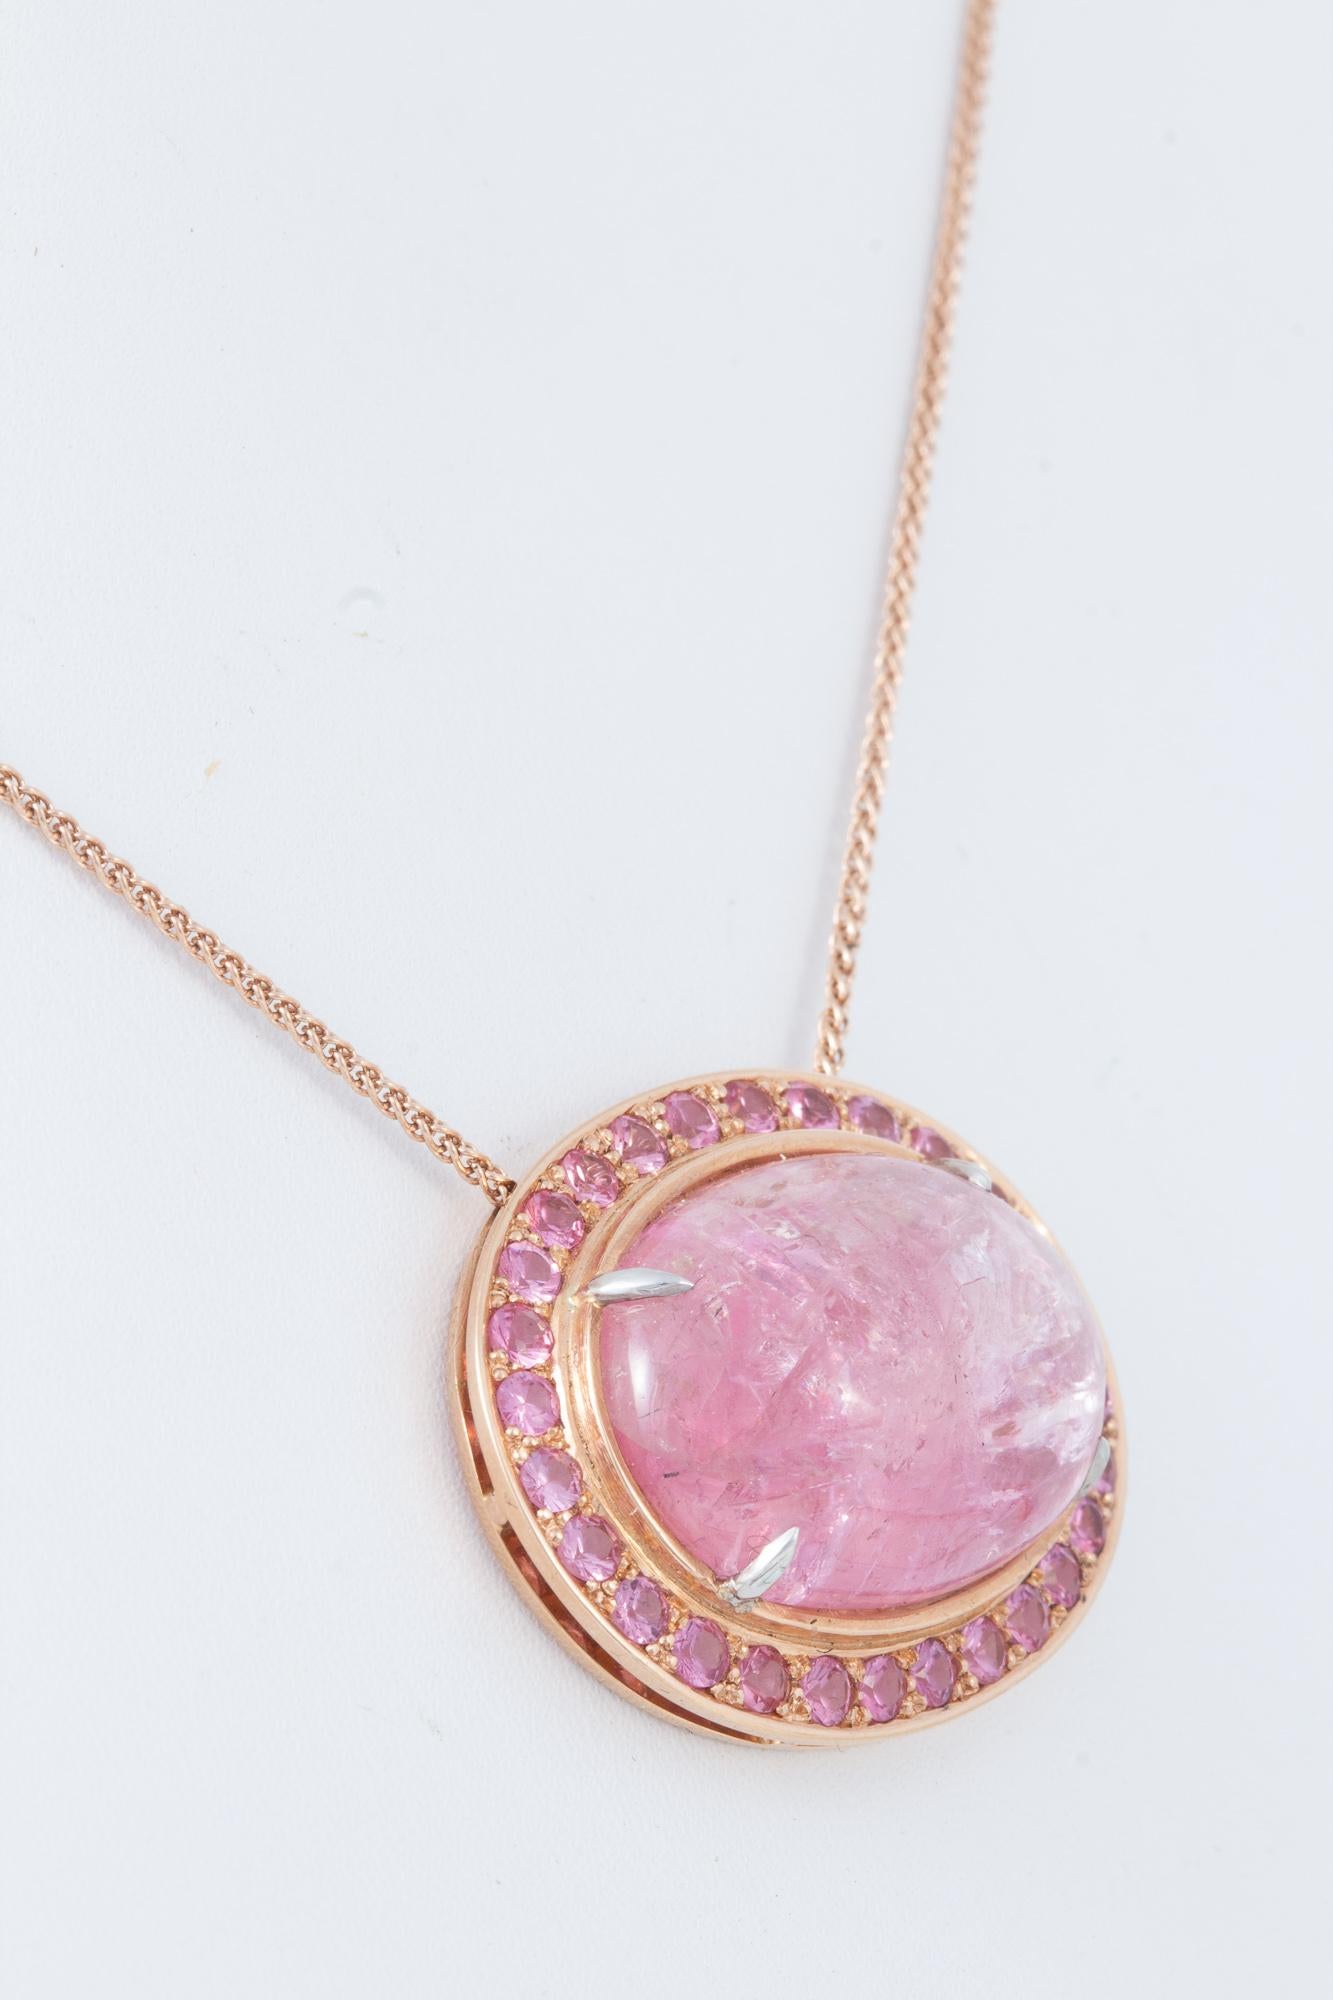 Oval Cut Rare Pink Fancy Tanzanite Cabochon Necklace in 18 kt Rose Gold For Sale